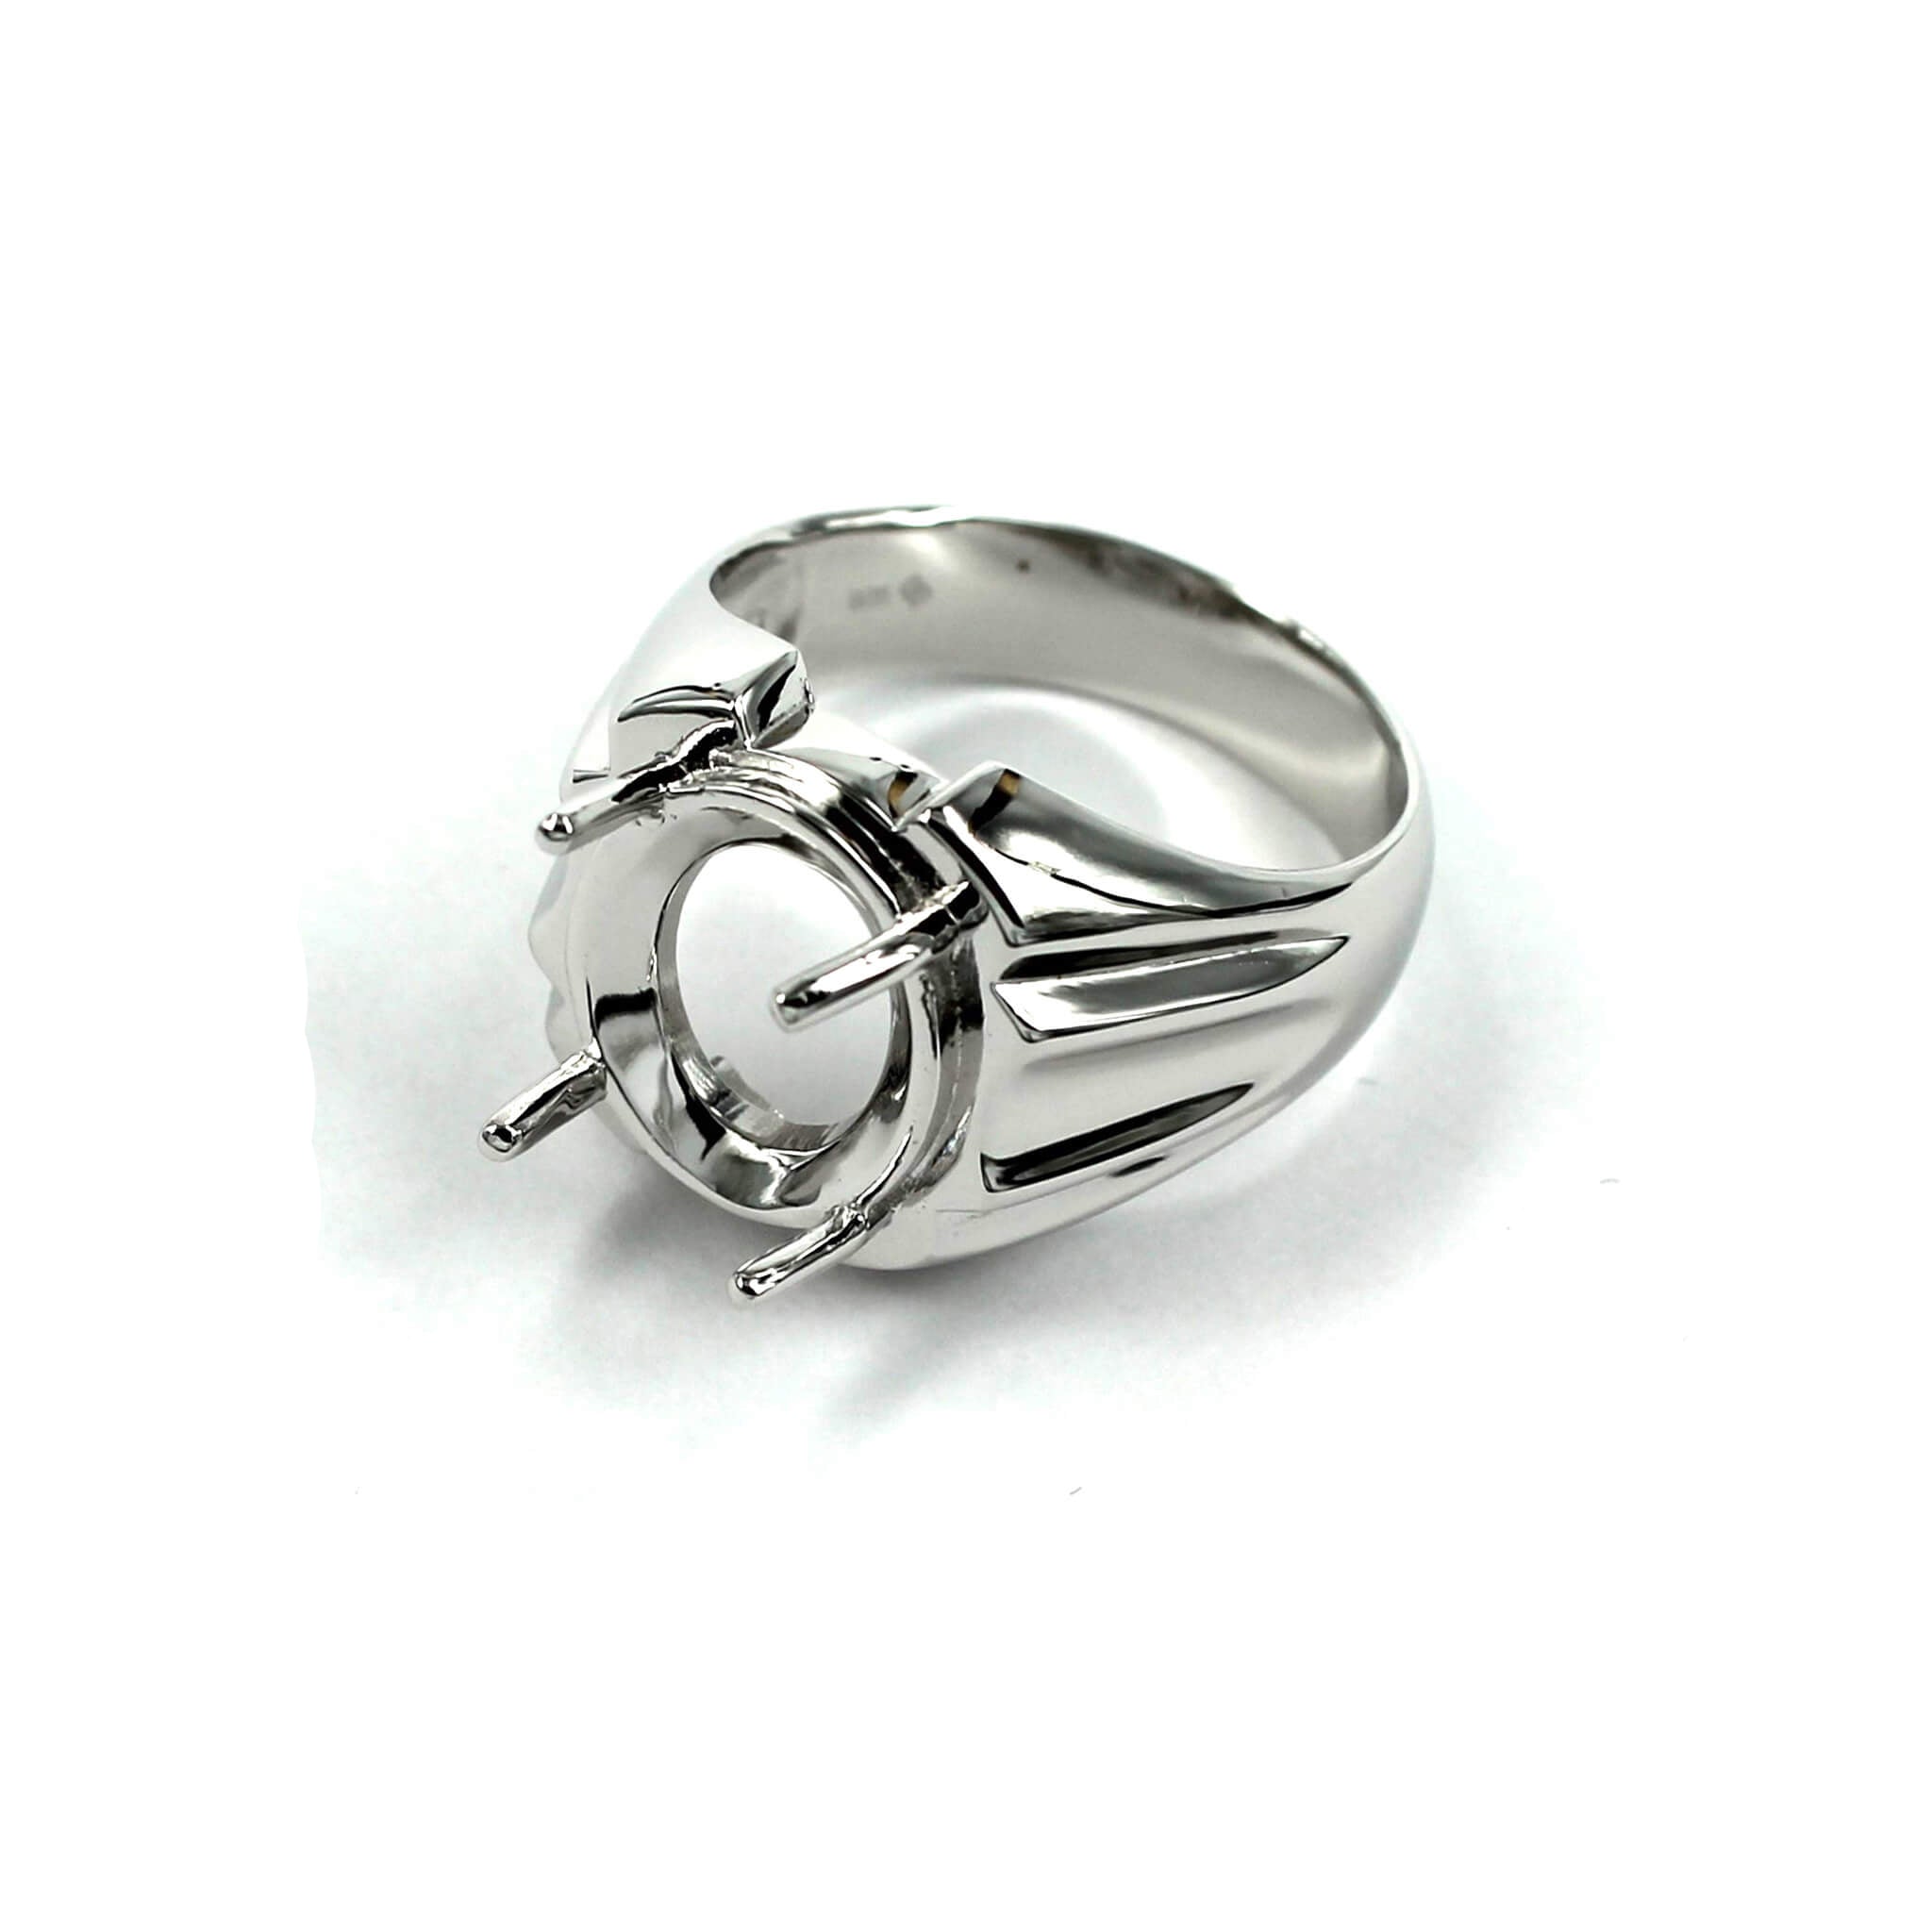 Patterned Tapered Ring with Oval Prongs Mounting in Sterling Silver 12x14mm